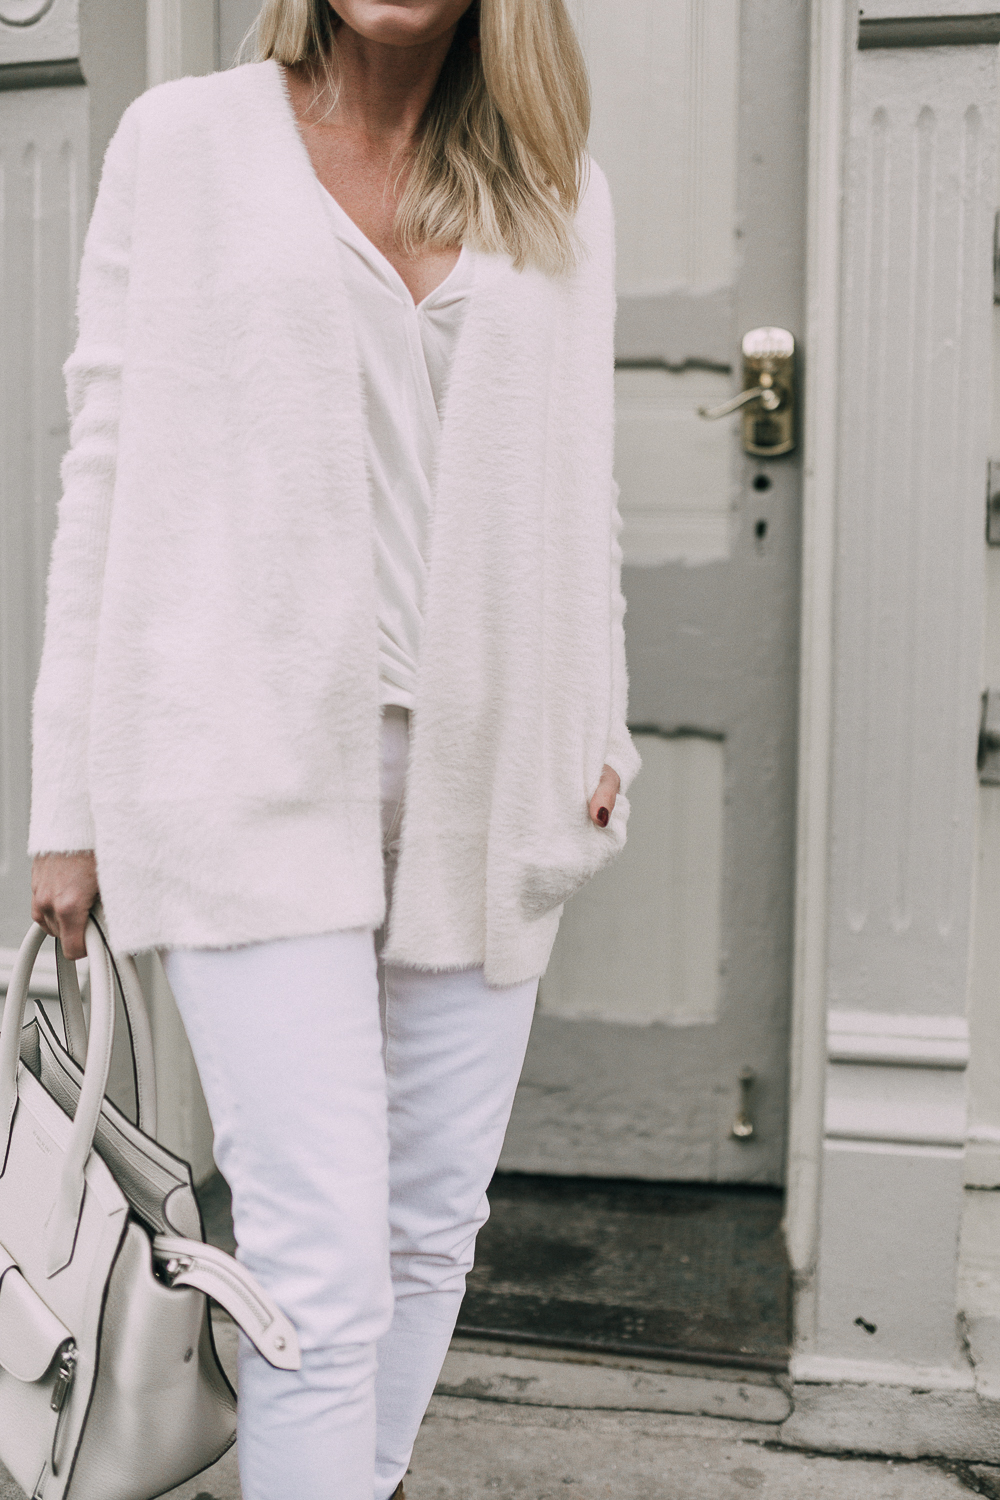 Fashion blogger Erin Busbee of BusbeeStyle.com sharing a winter white look with a Banana Republic cardigan, white jeans, white wrap front top, and white Henri Bendel bag